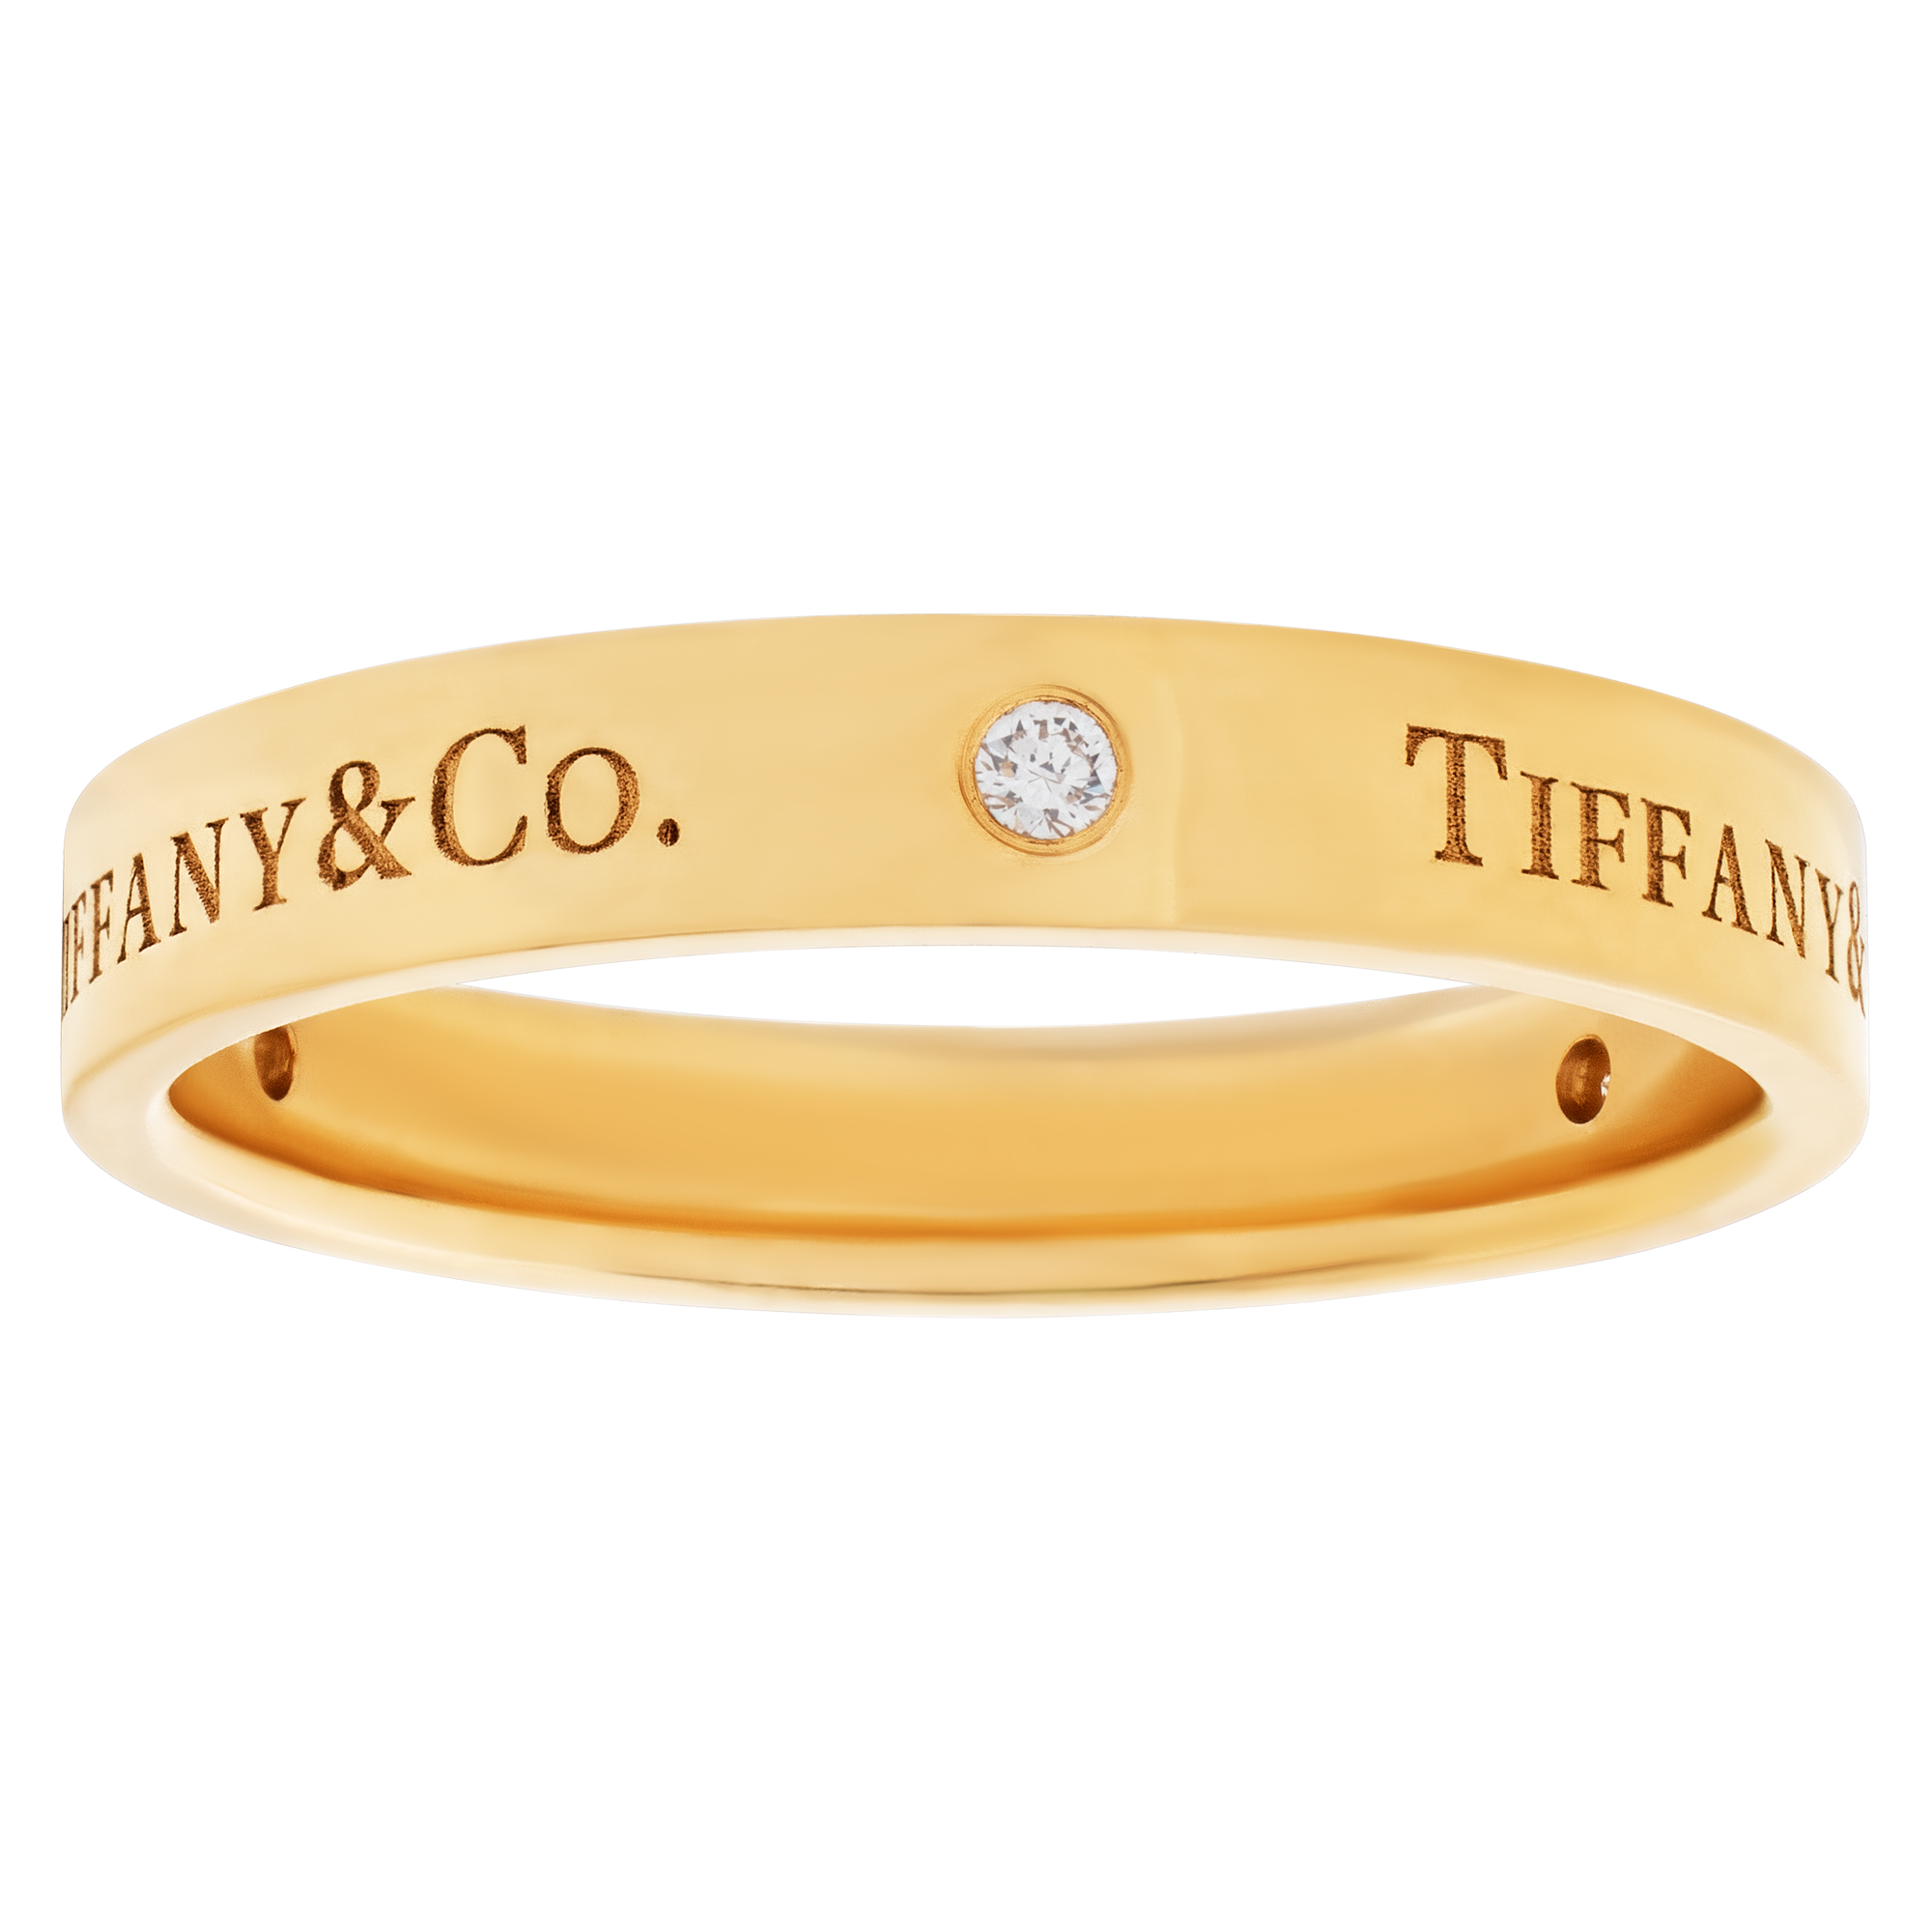 Tiffany & Co. Band with 3 diamonds in 18k yellow gold